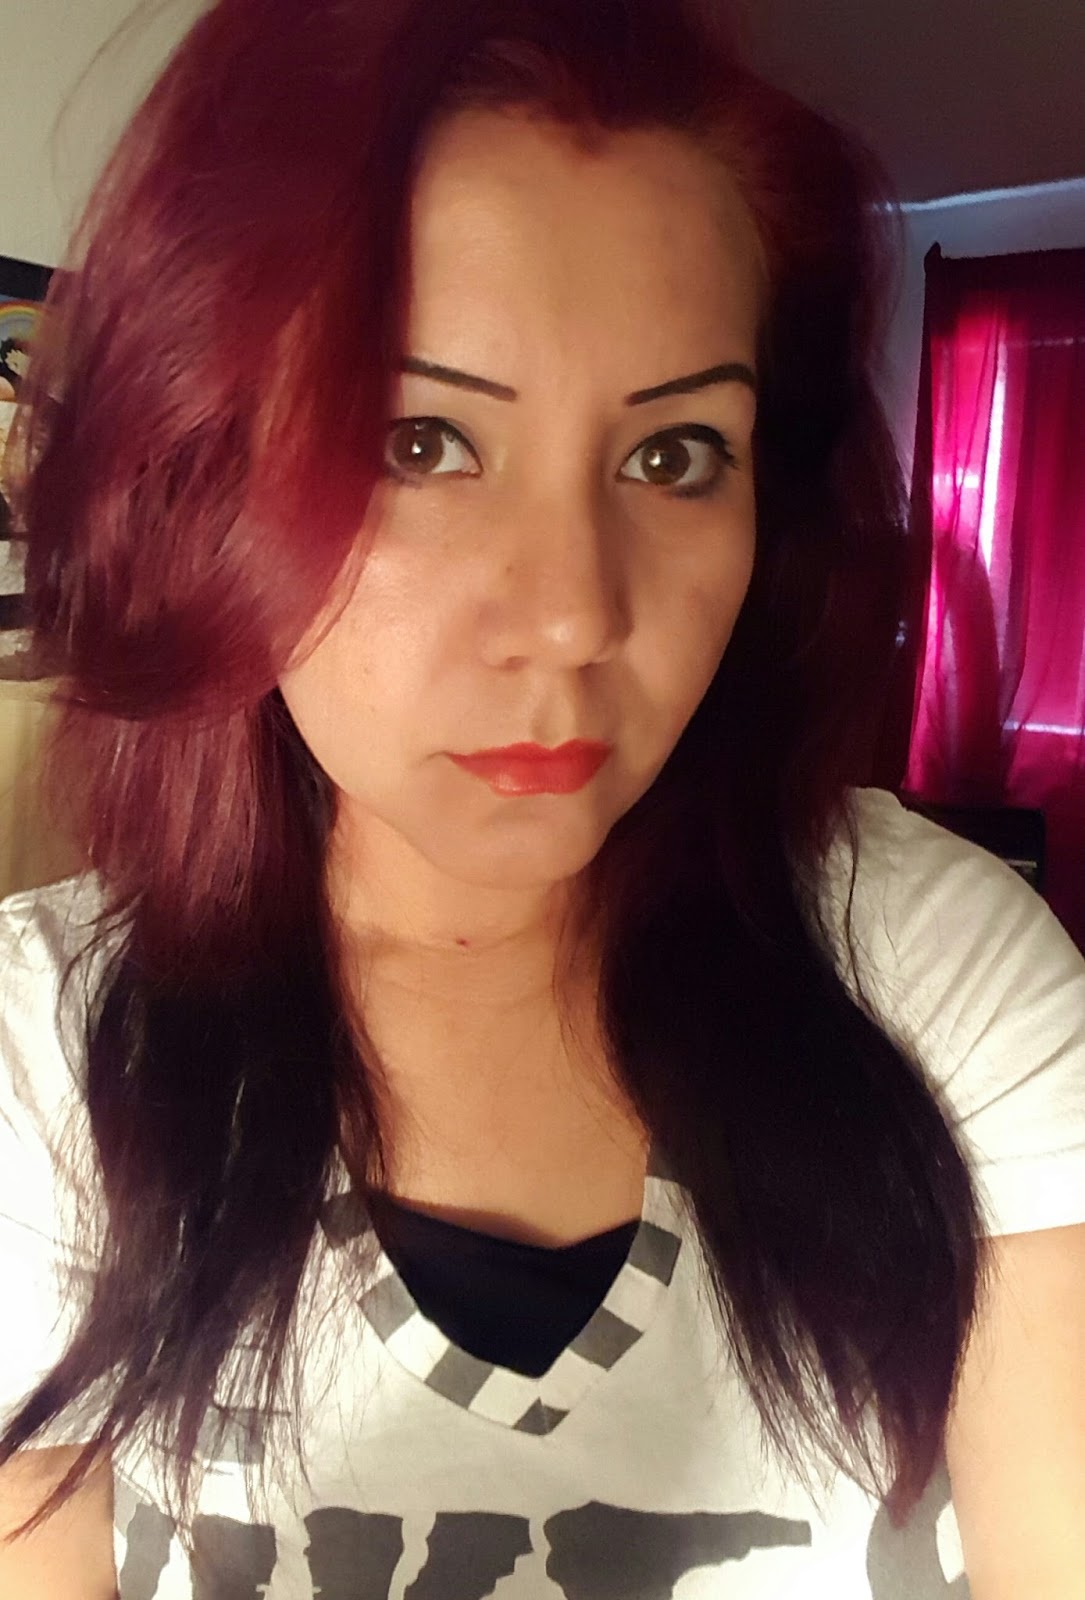 My So Called Life Splat Hair Dye Crimson Obsession Review Part 2